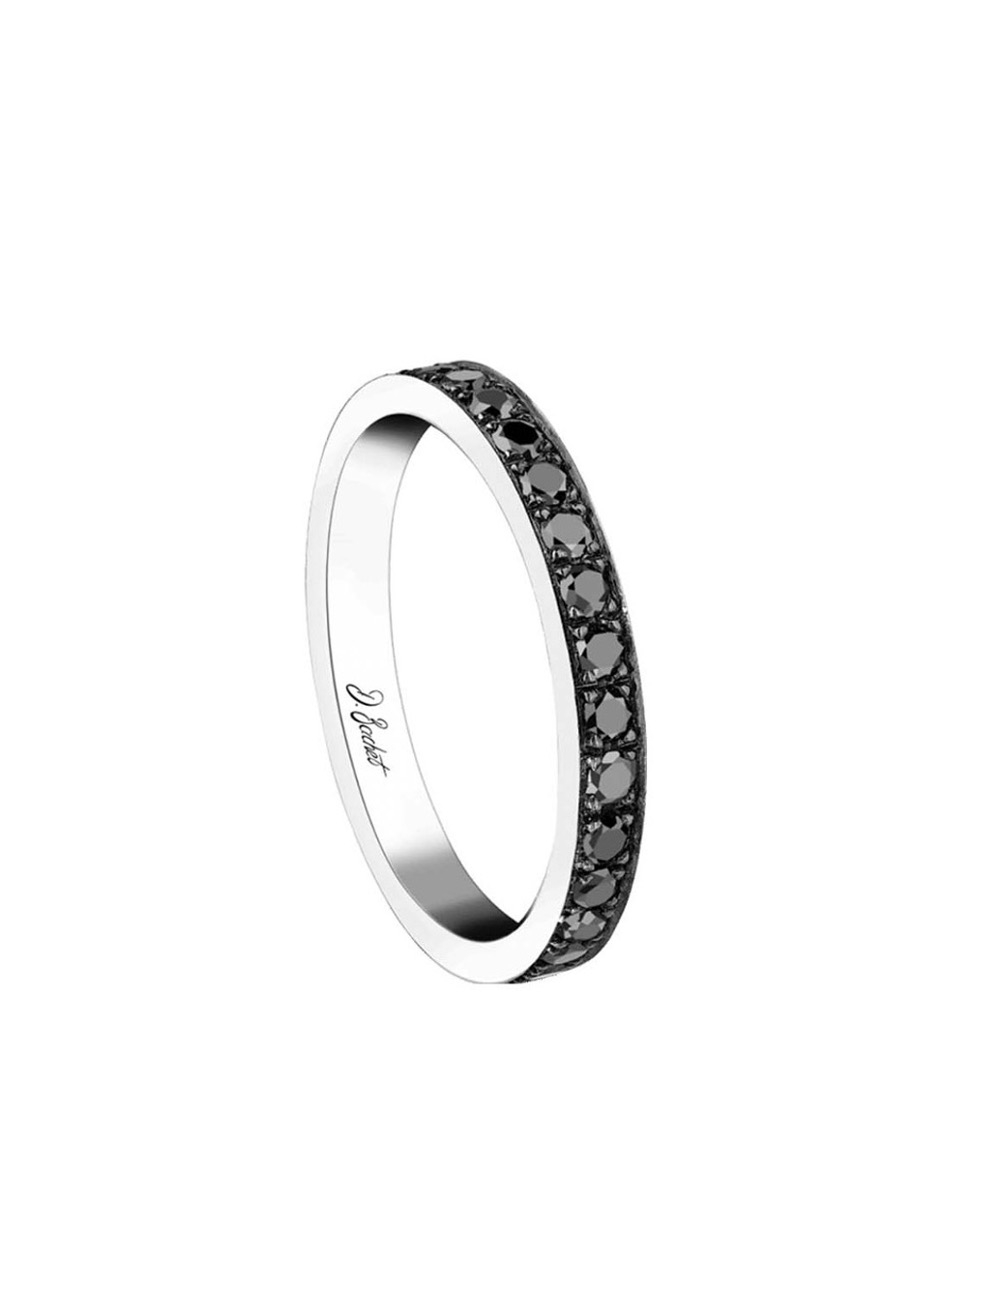 Unisex platinum wedding band, set with sparkling black diamonds around the ring, capturing light in a refined manner.